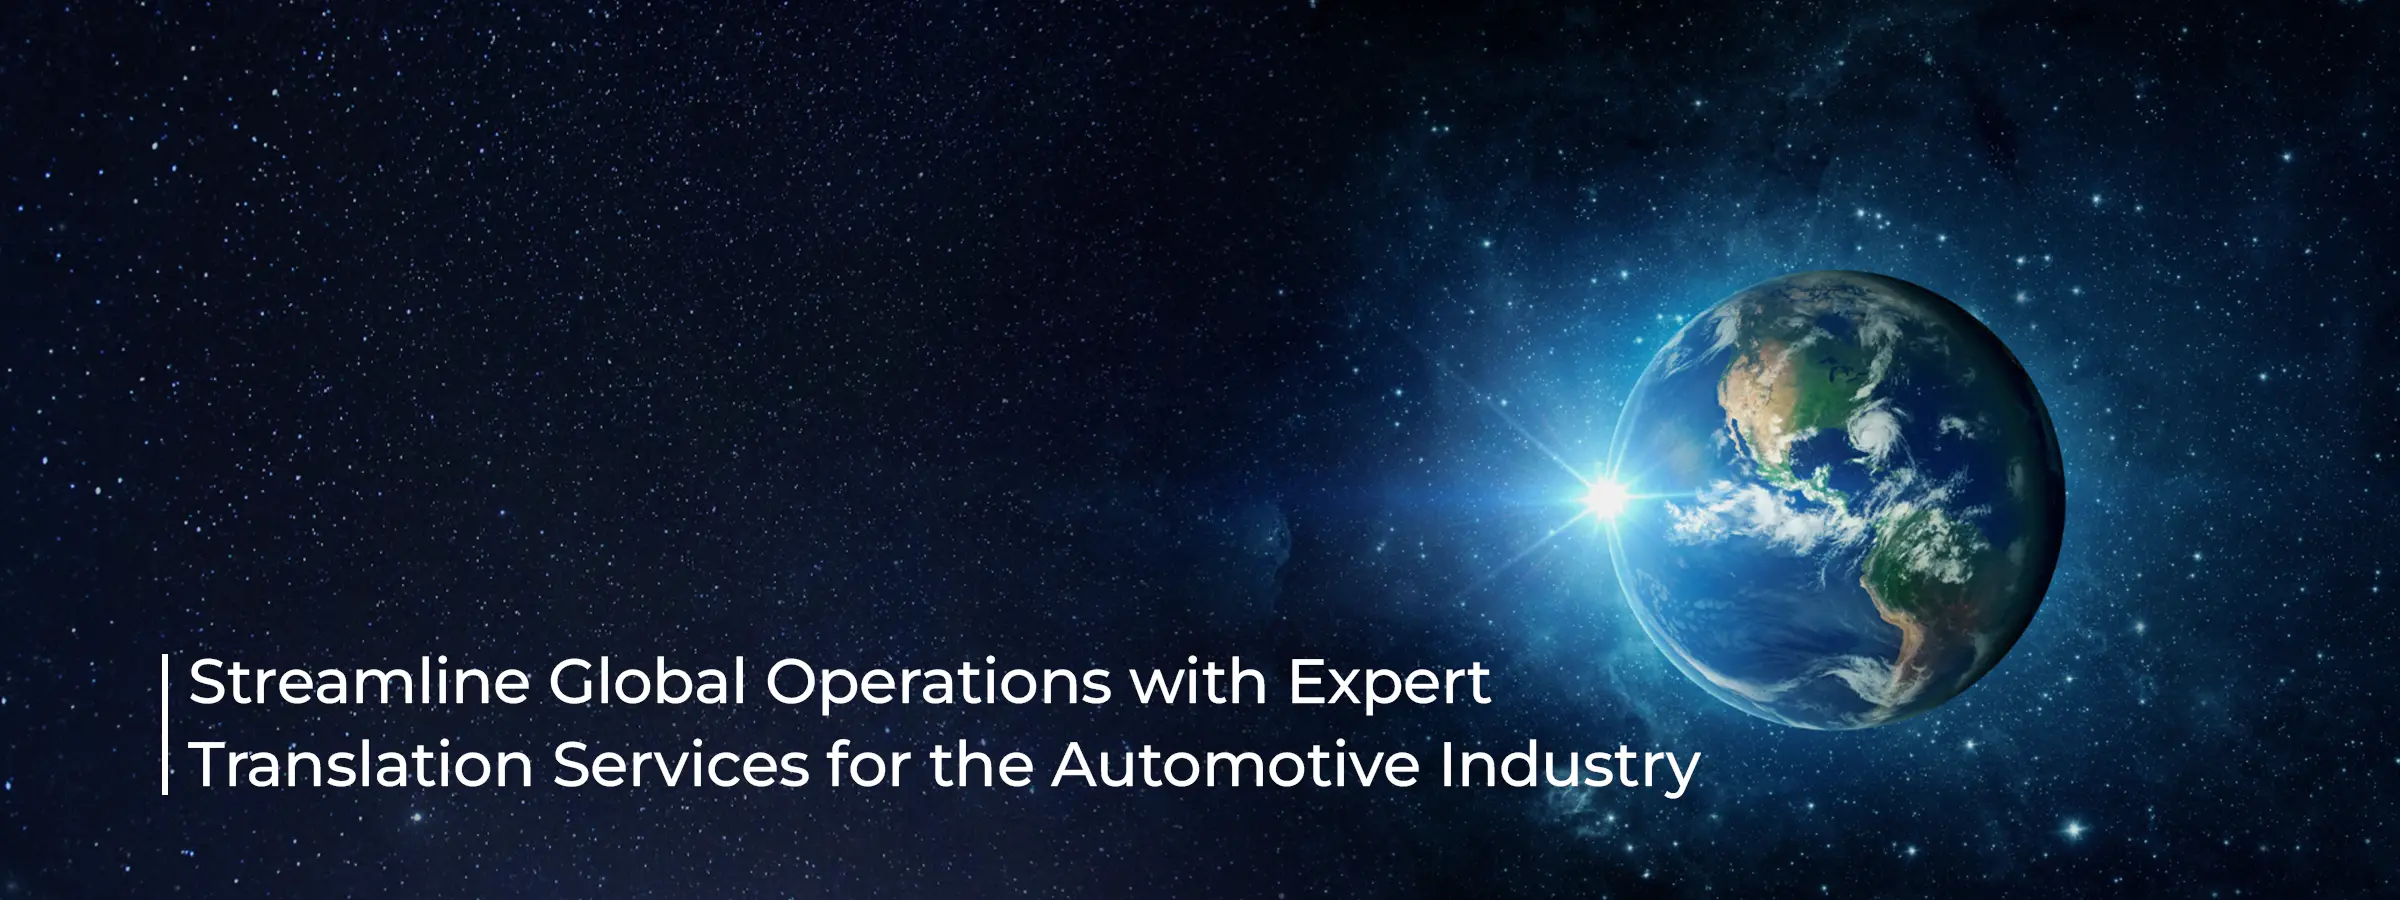 streamline-global-operations-with-expert-translation-services-for-the-automotive-industry